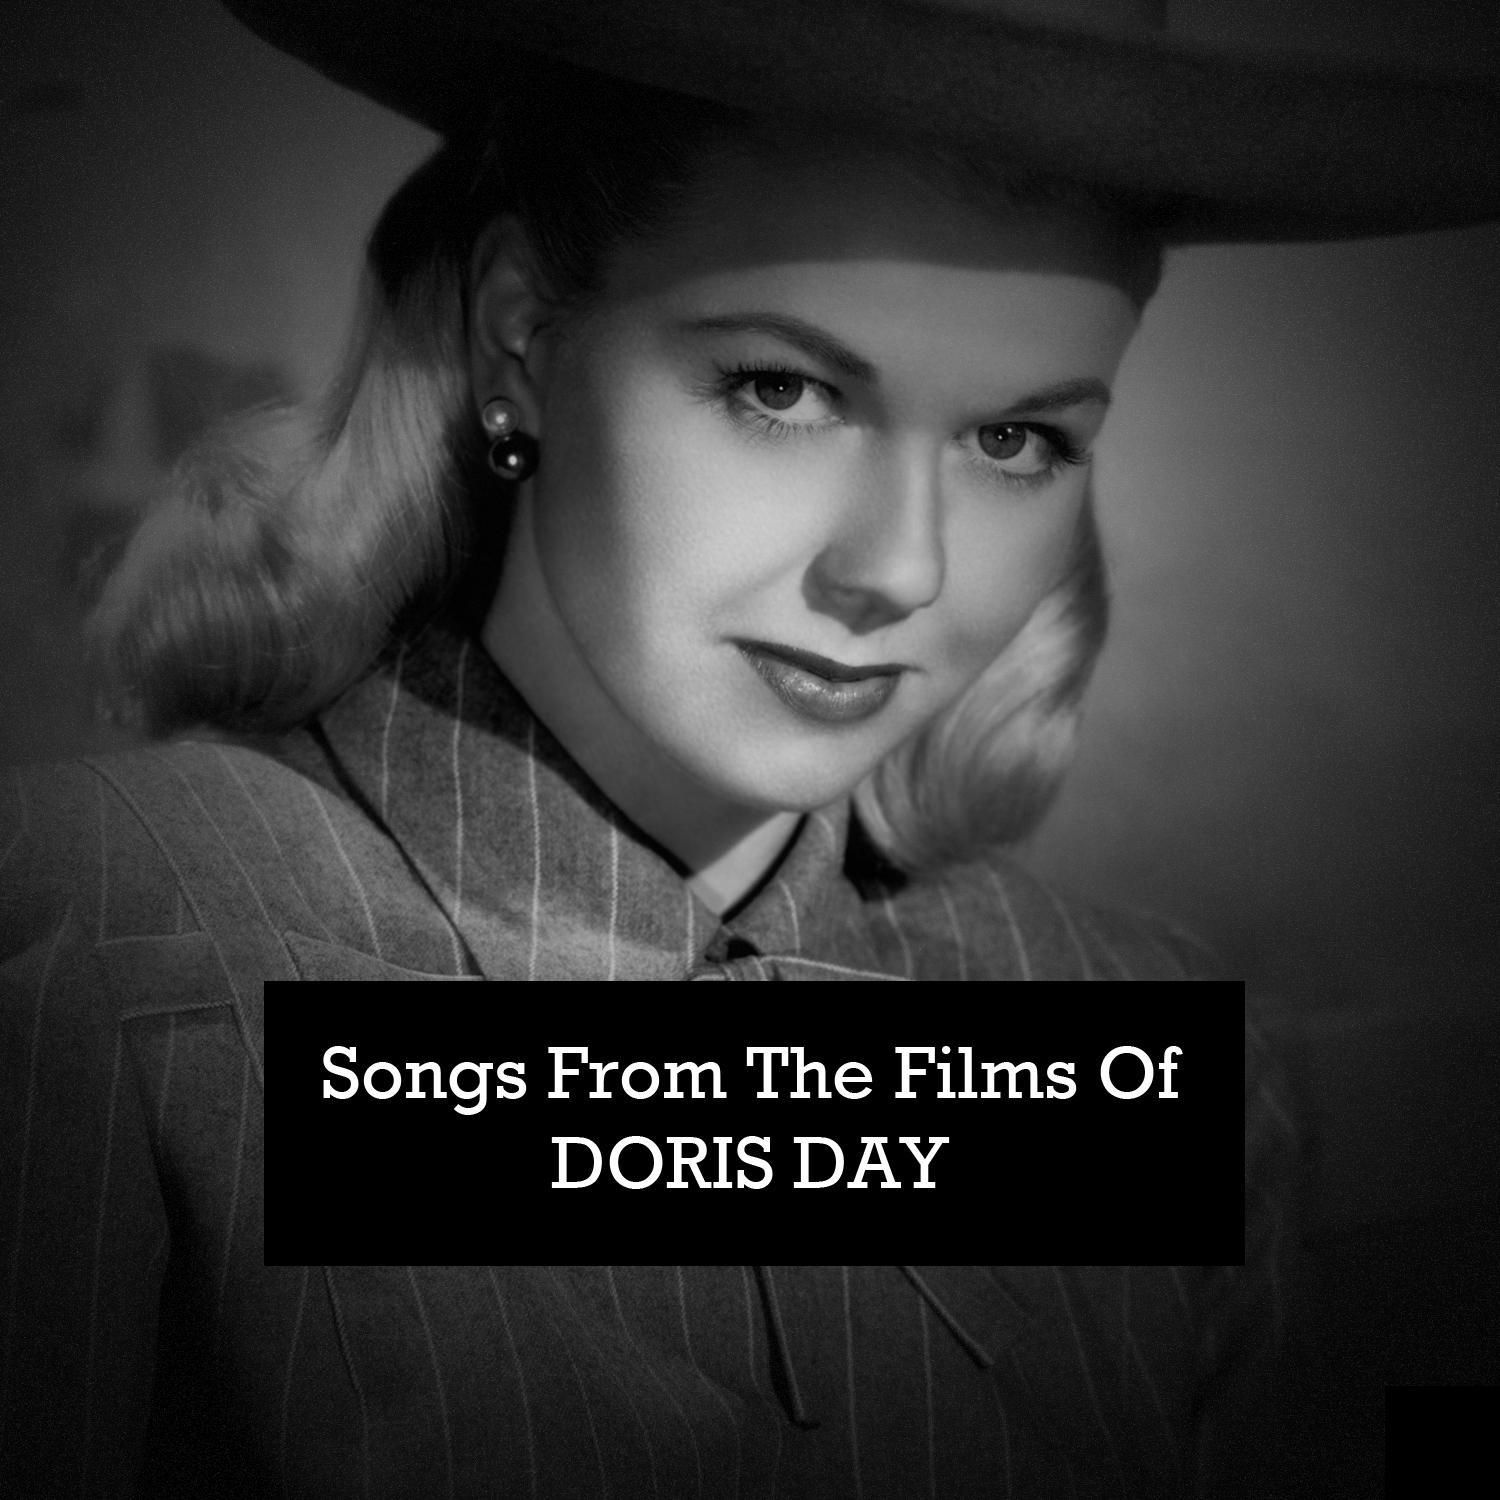 Songs from the Films of Doris Day